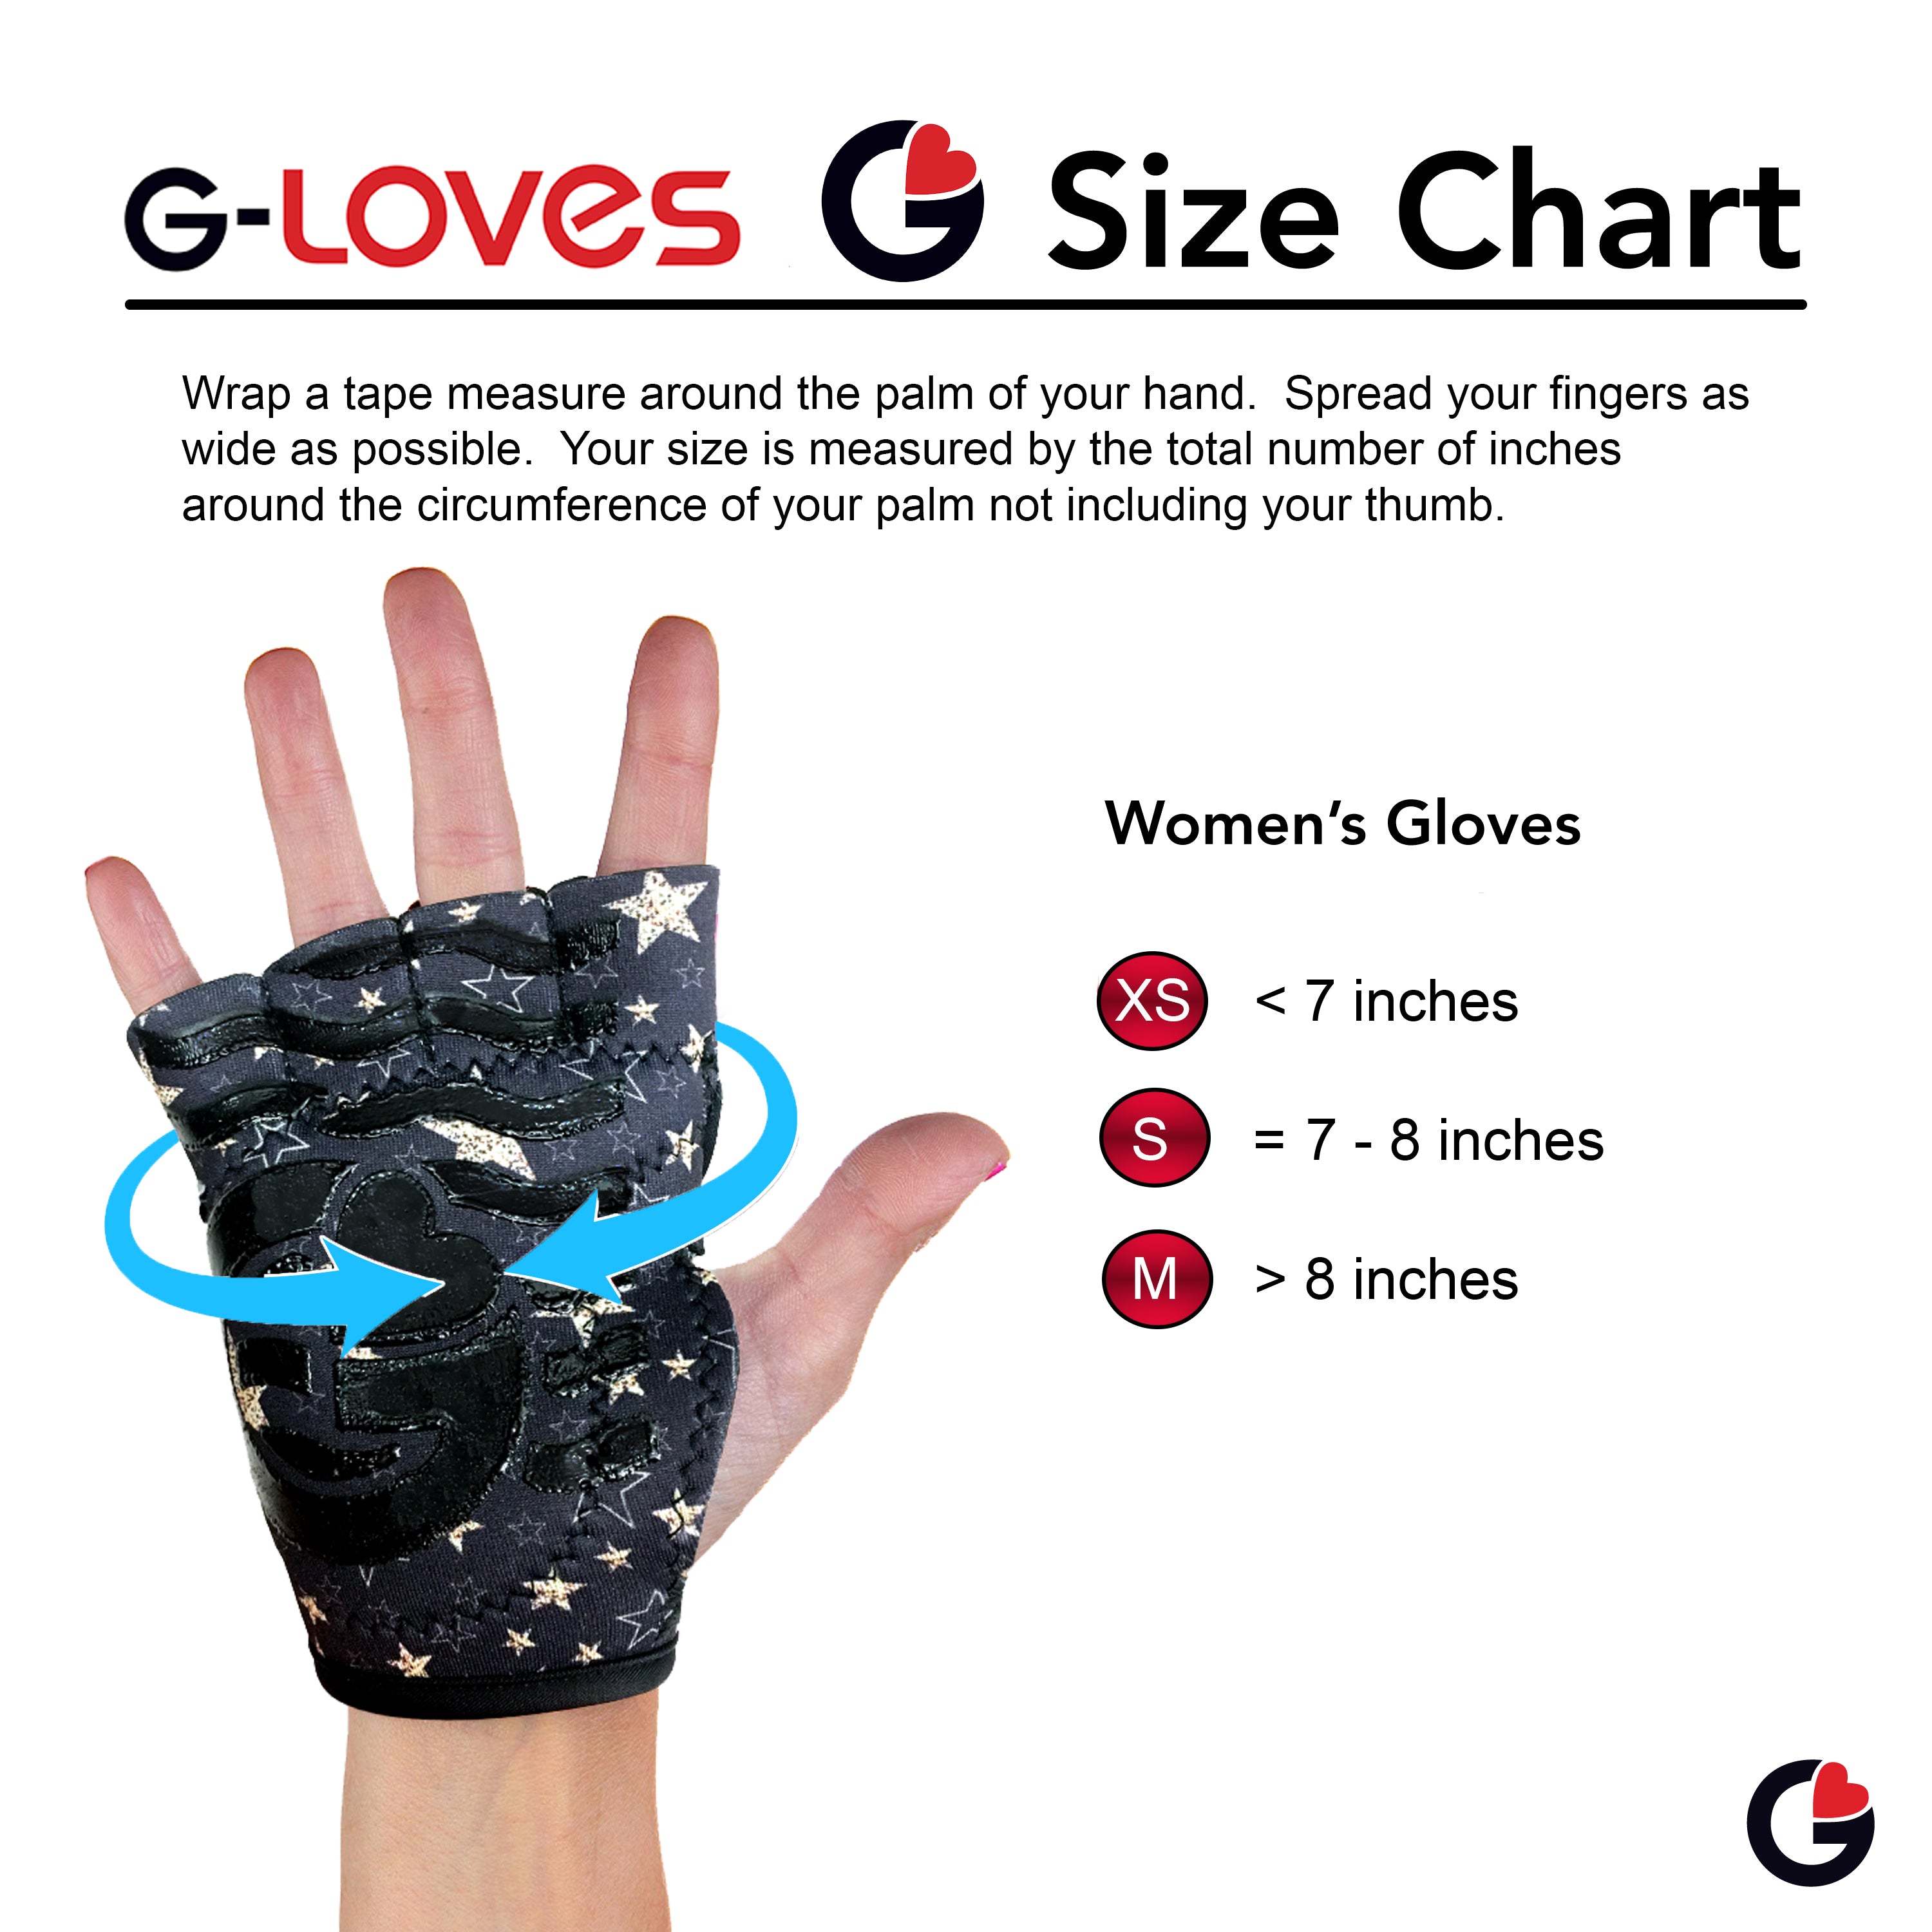 G-Loves Size Chart